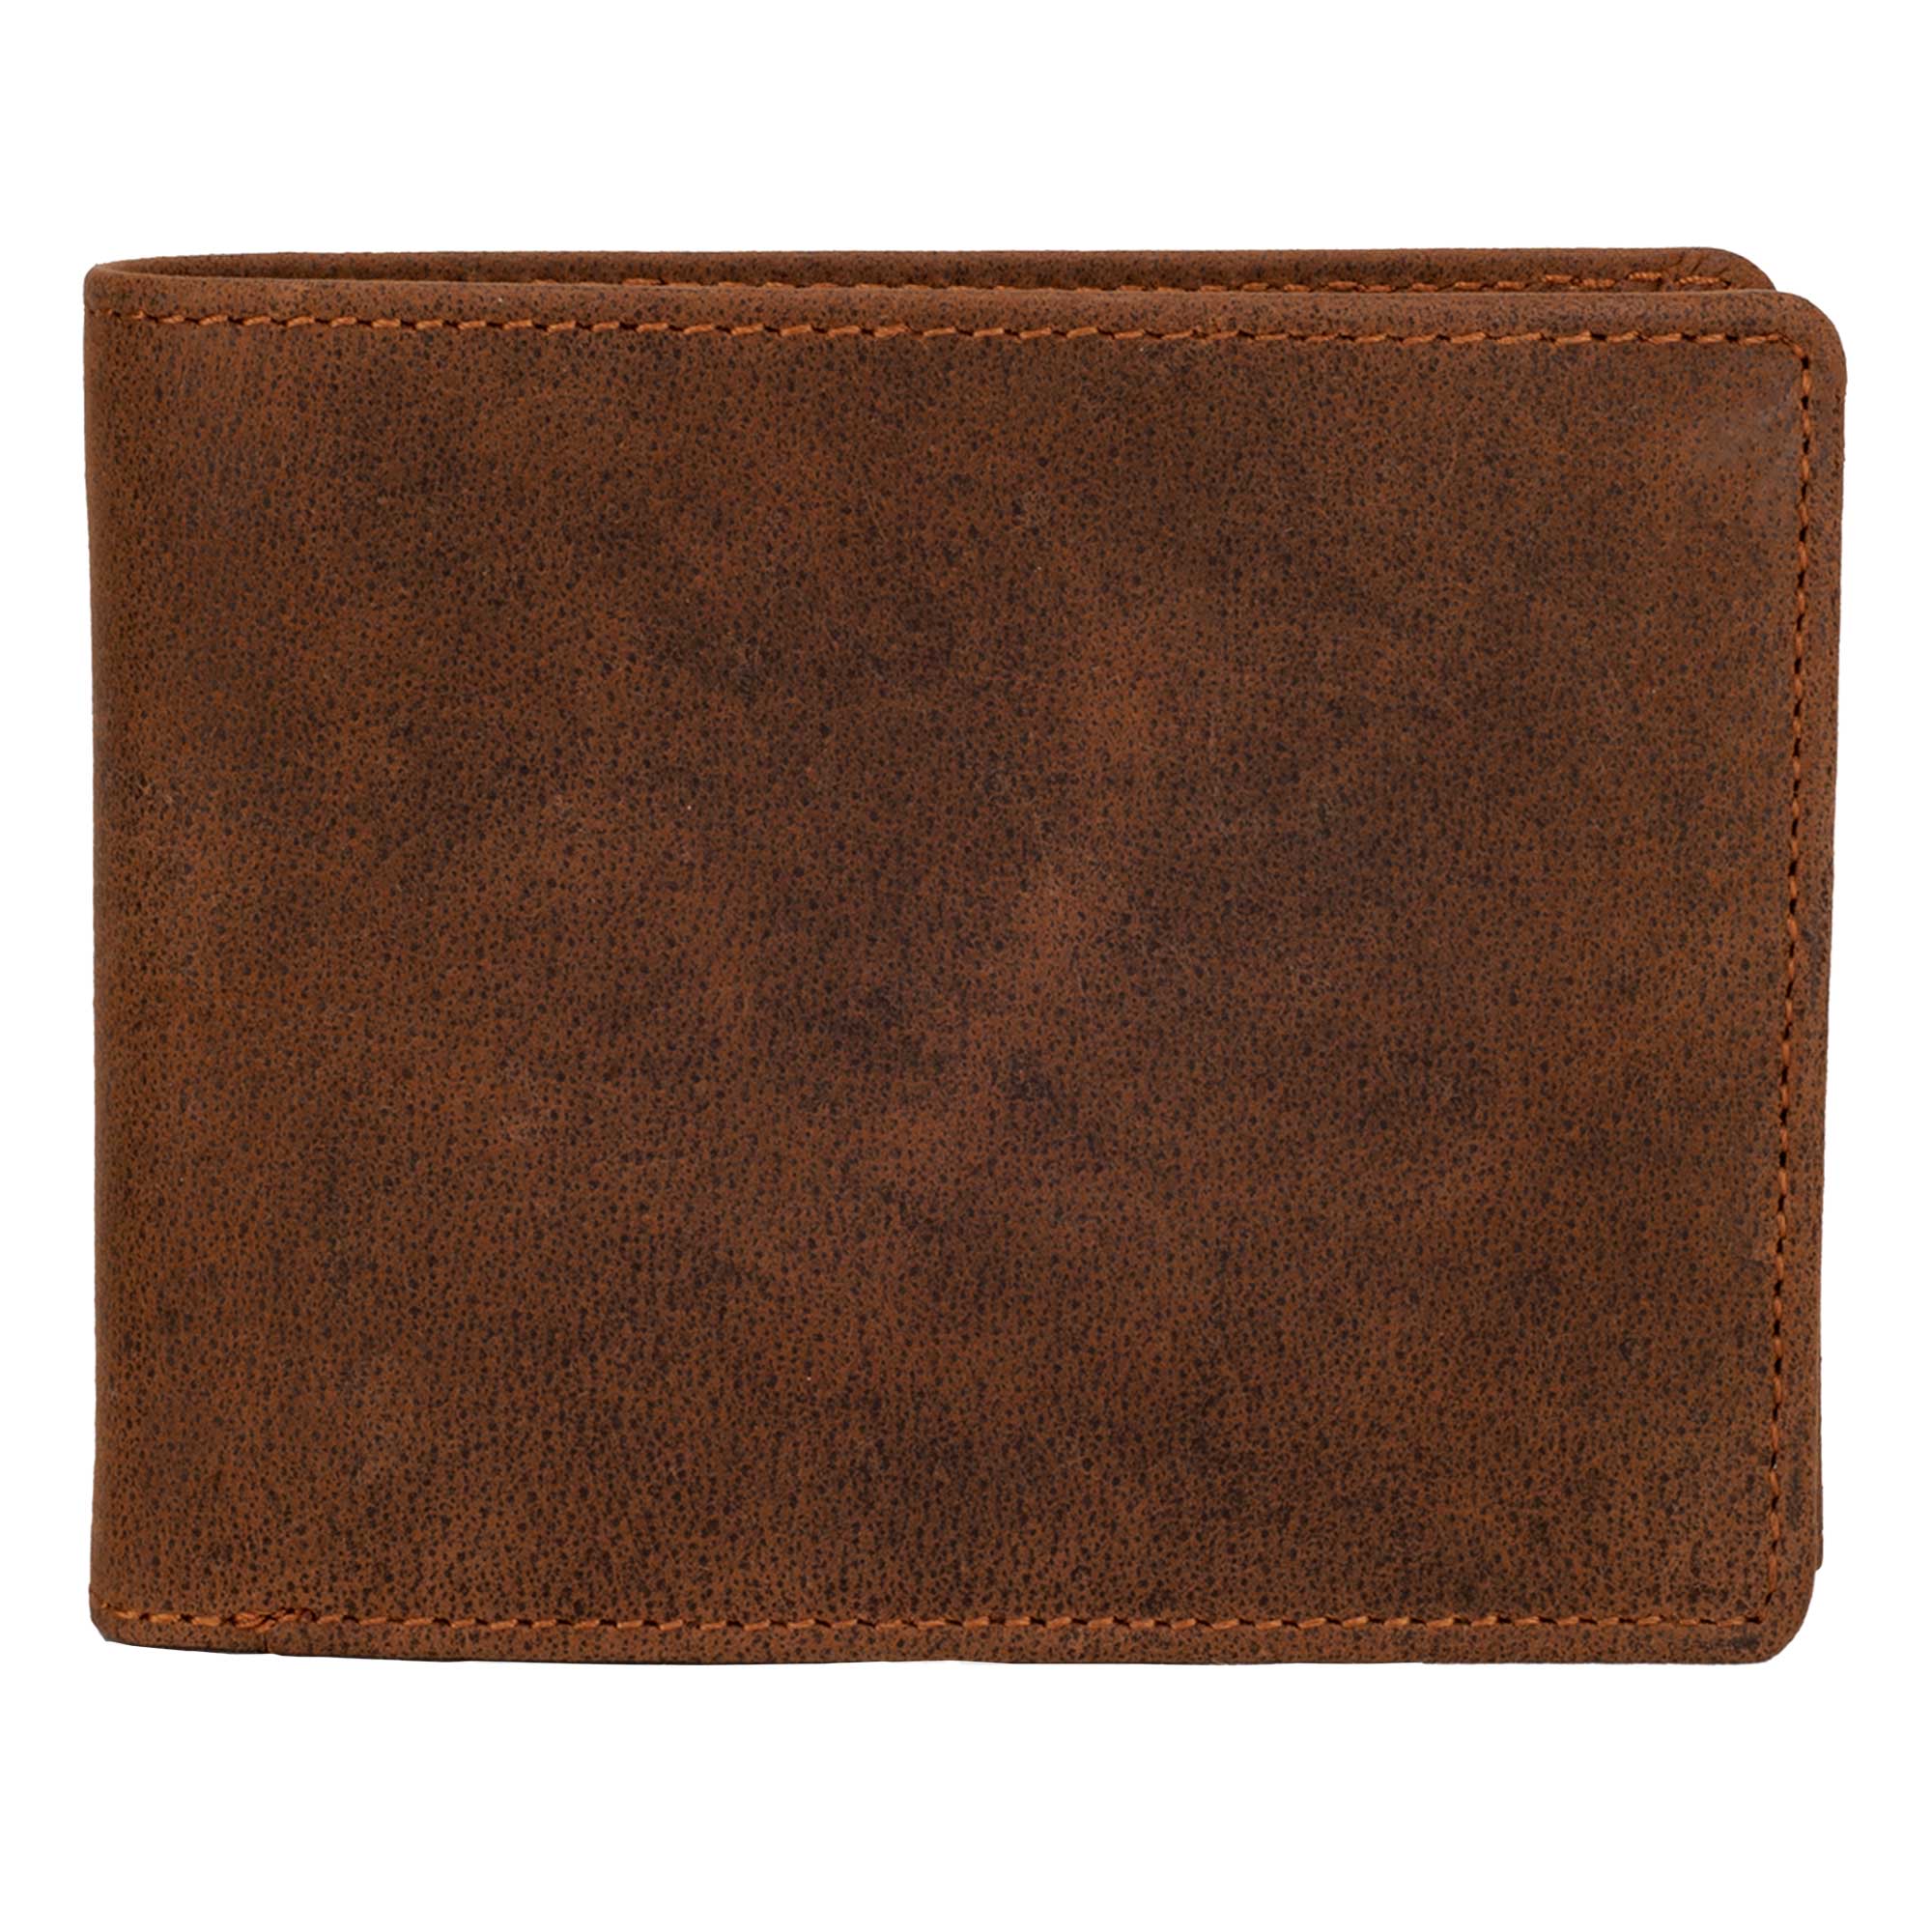 DiLoro Men's Leather Bifold Flip ID Zip Coin Wallet with RFID Protection - Dark Hunter Brown Front View